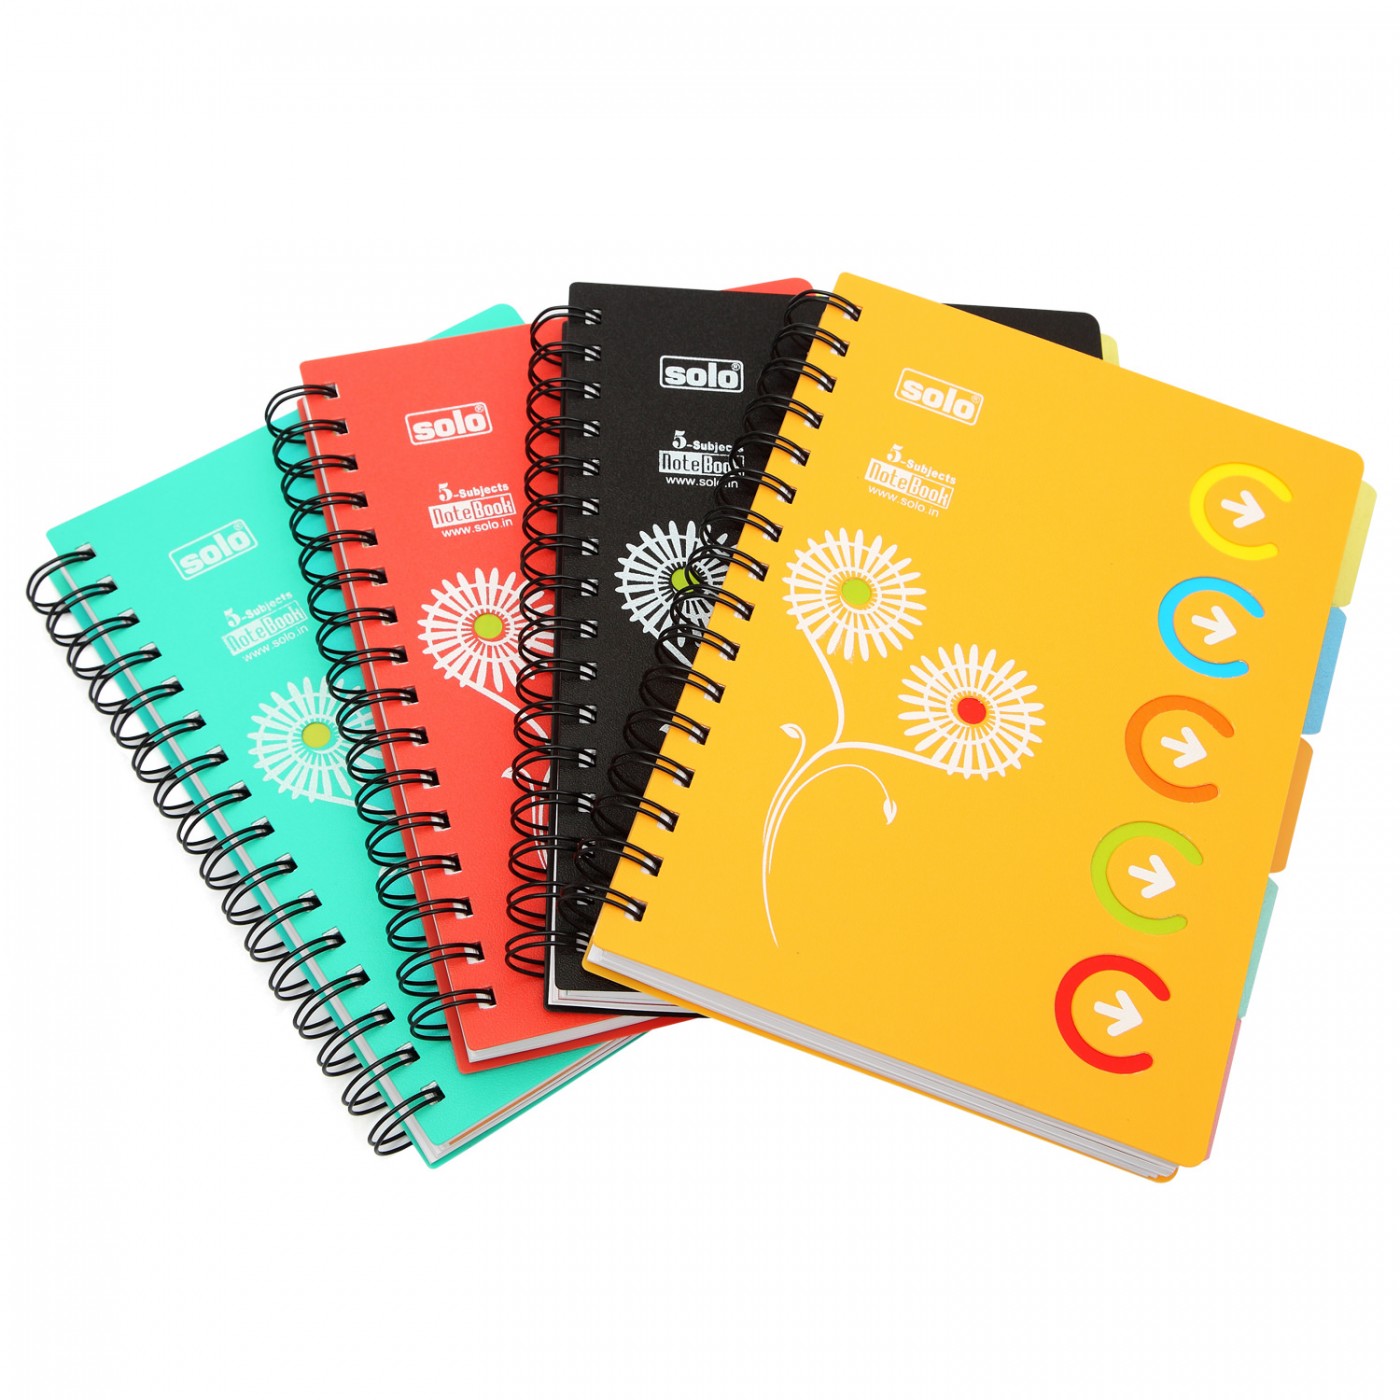 SOLO Premium 5 Subject Notebook - A5, 70 GSM, 300 pages, Single ...